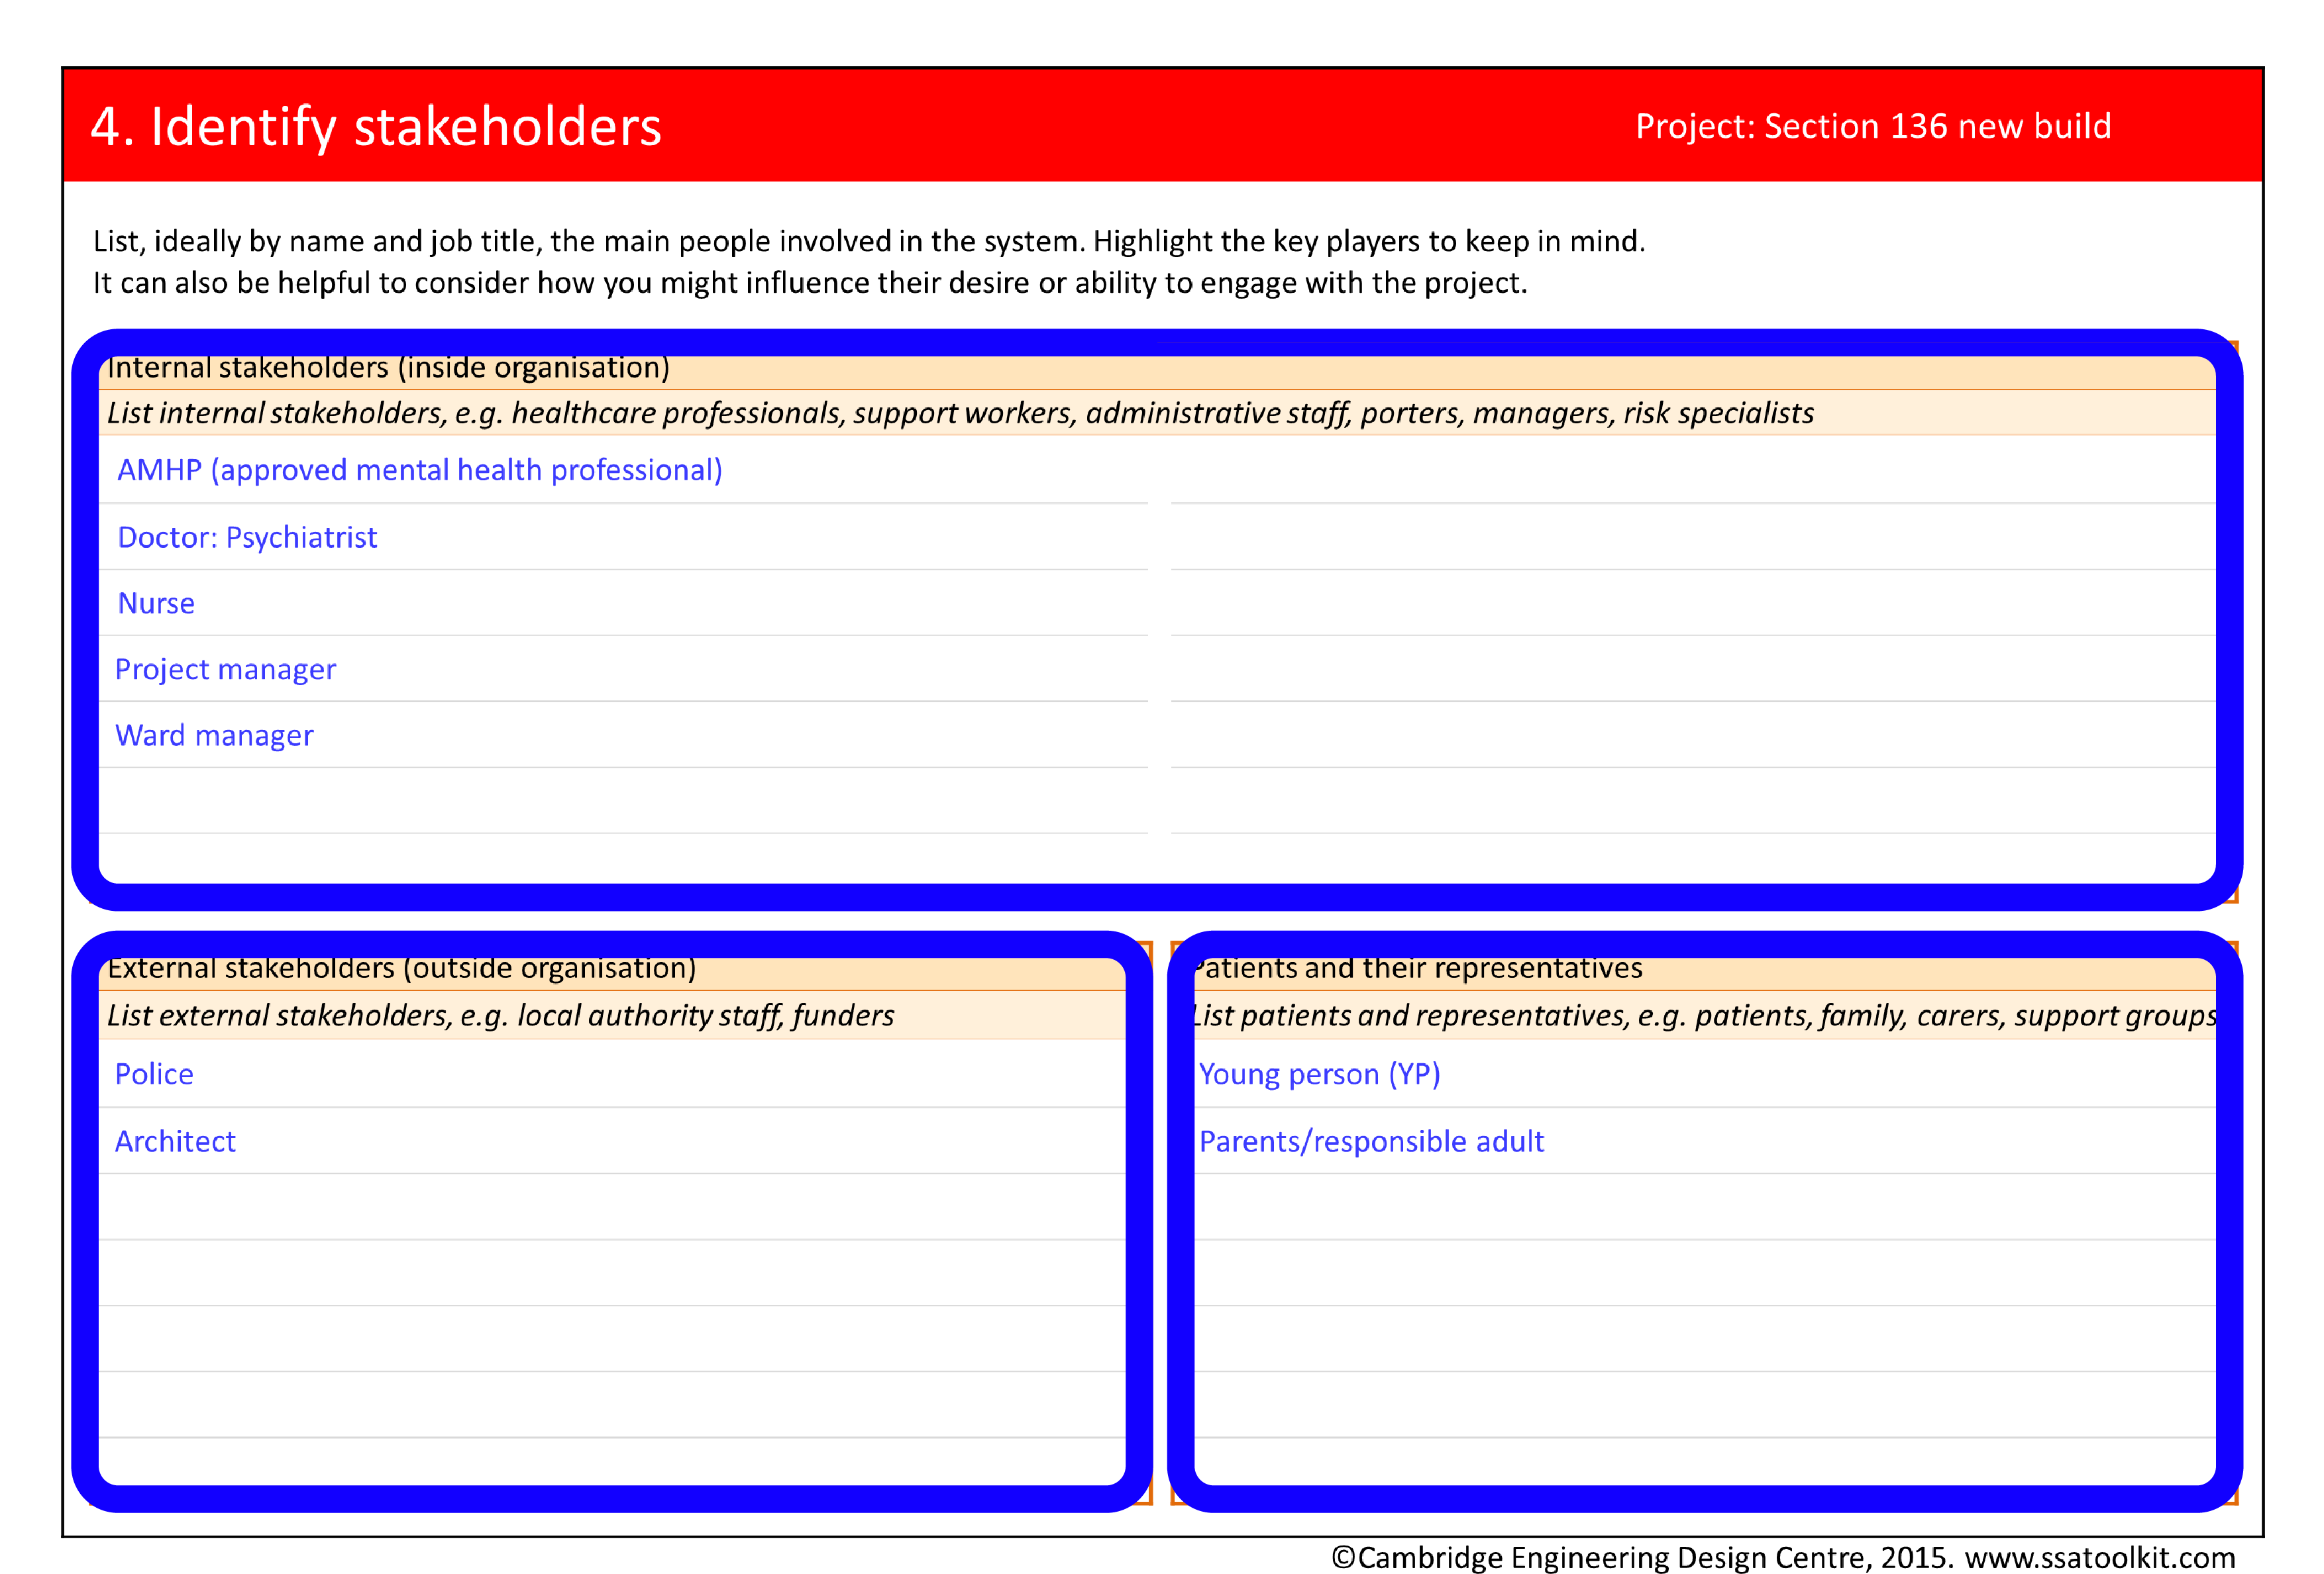 Screenshot of the Identify stakeholders page from the Section 136 case study. The stakeholders are divided into three sections. Internal stakeholders are: approved mental health professional, psychiatrist, nurse, project manager and ward manager. External stakeholders are: police and architect. Patients and their representatives are young person (YP) and parents or responsible adult. The full form in pdf is available from the Resources page.